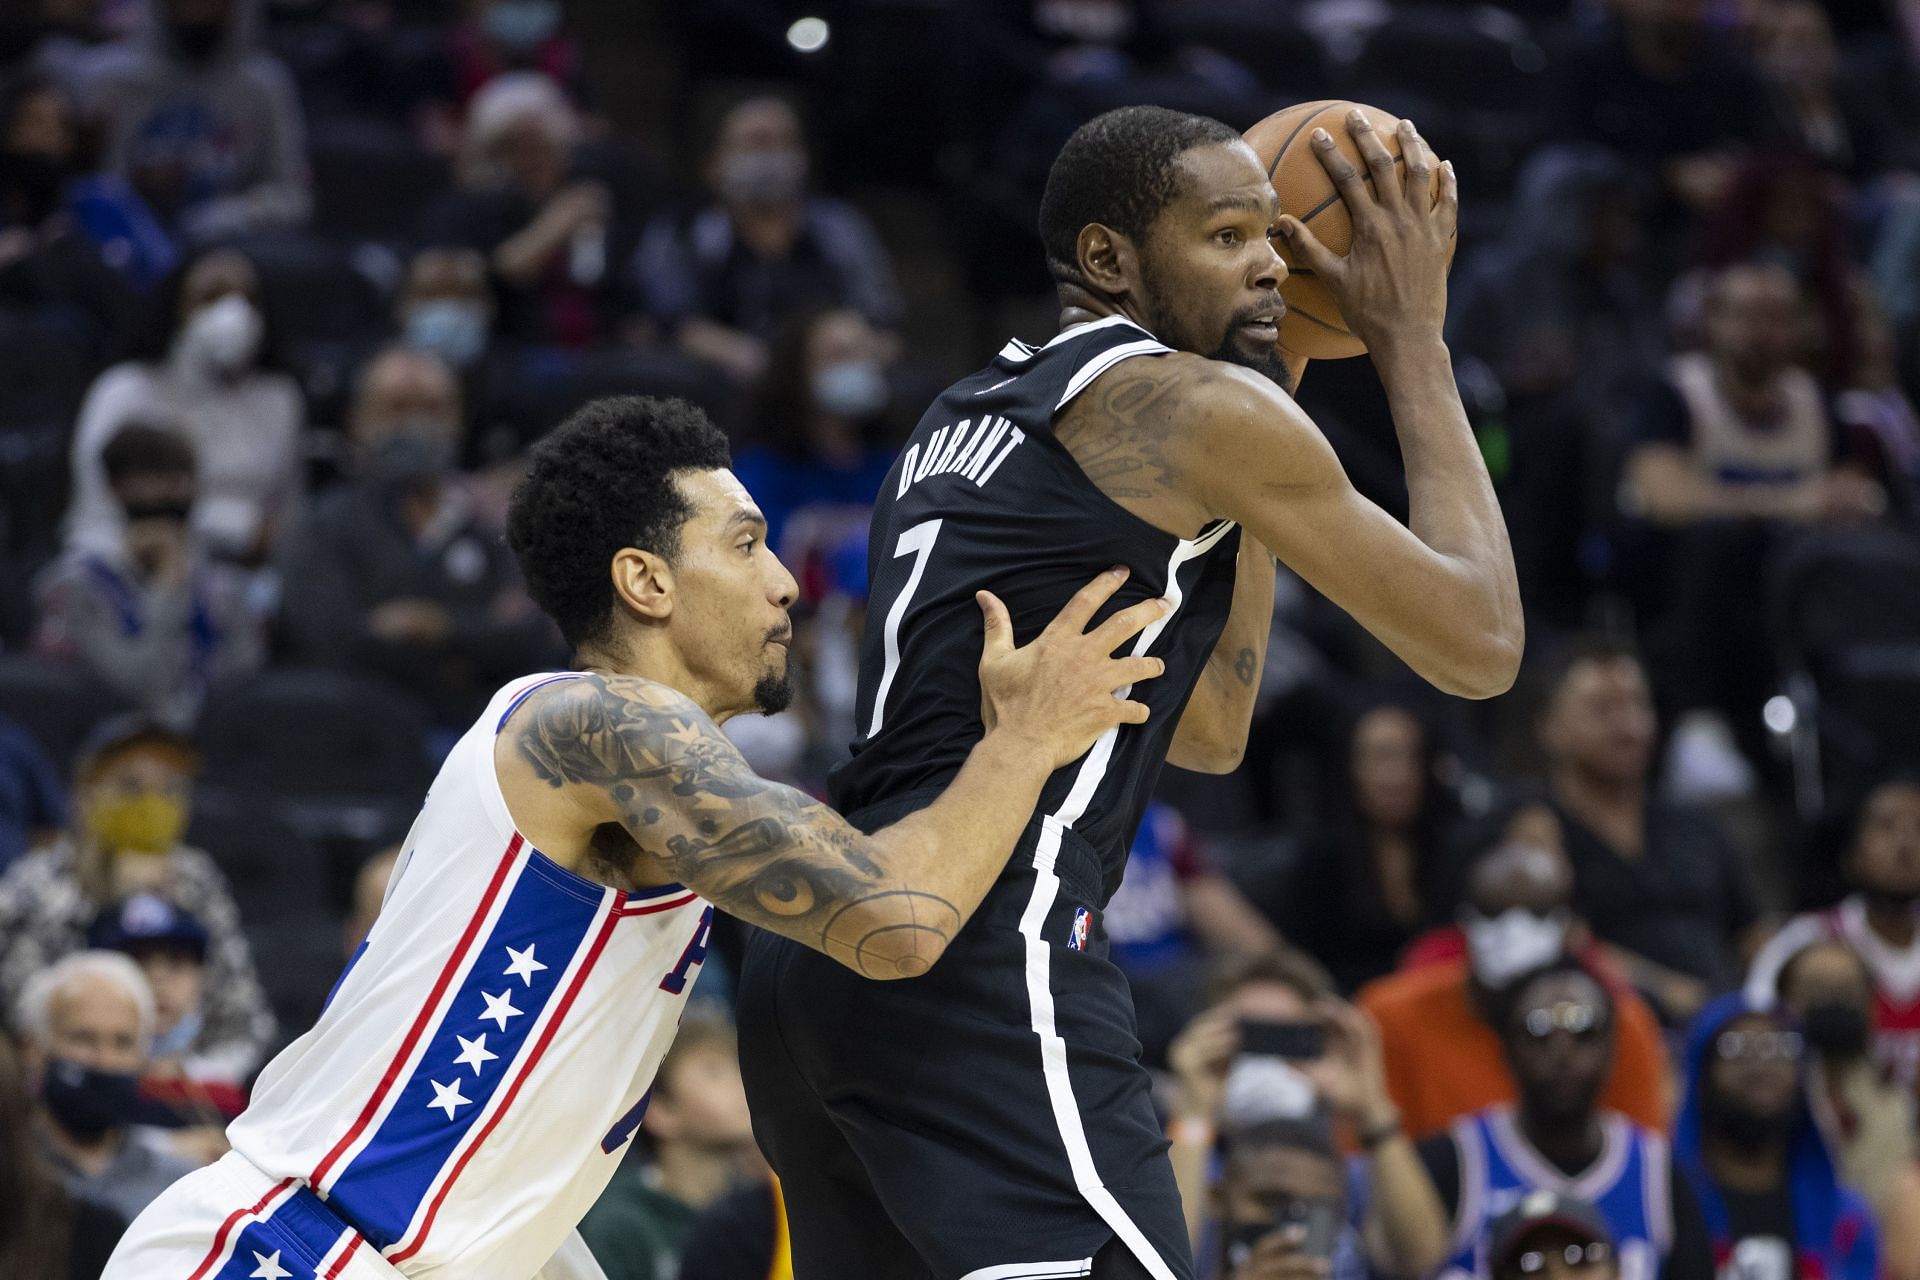 The Brooklyn Nets and the Philadelphia 76ers will face off on Friday